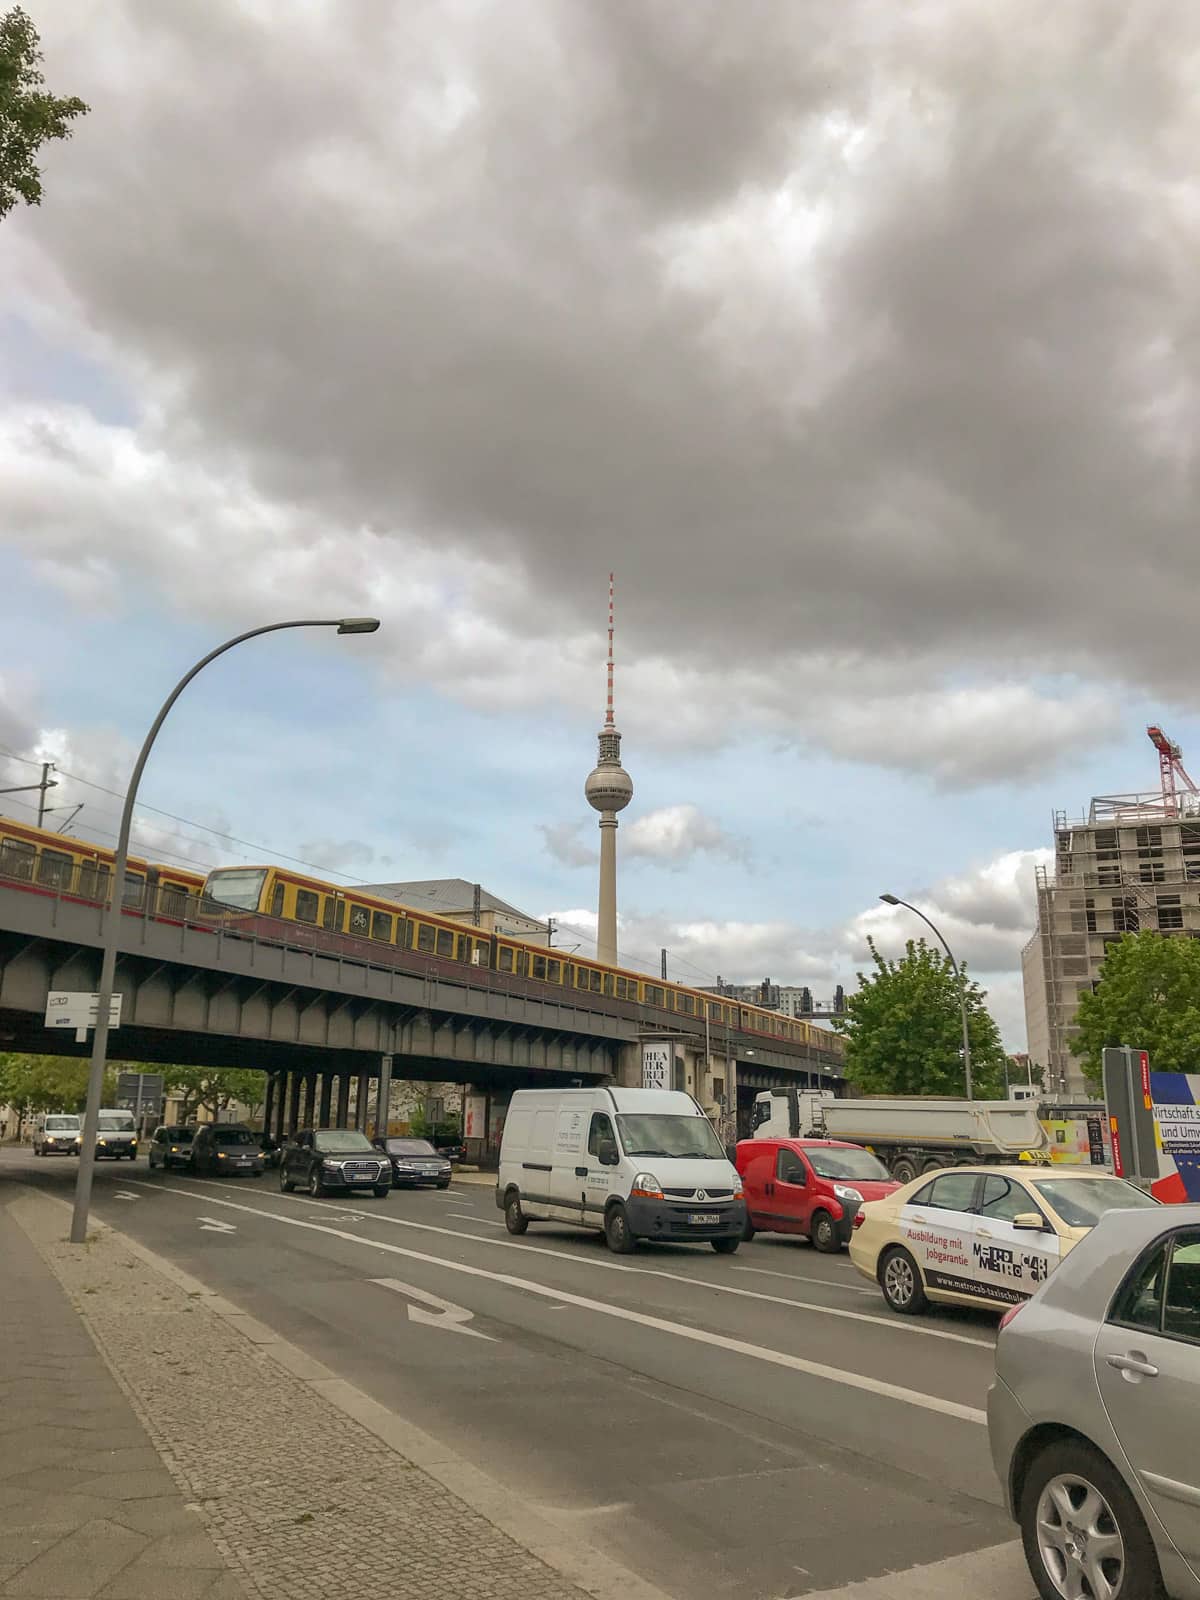 A view across a street with some cars on it, showing a train bridge in the background and a television tower further away. The sky is very cloudy